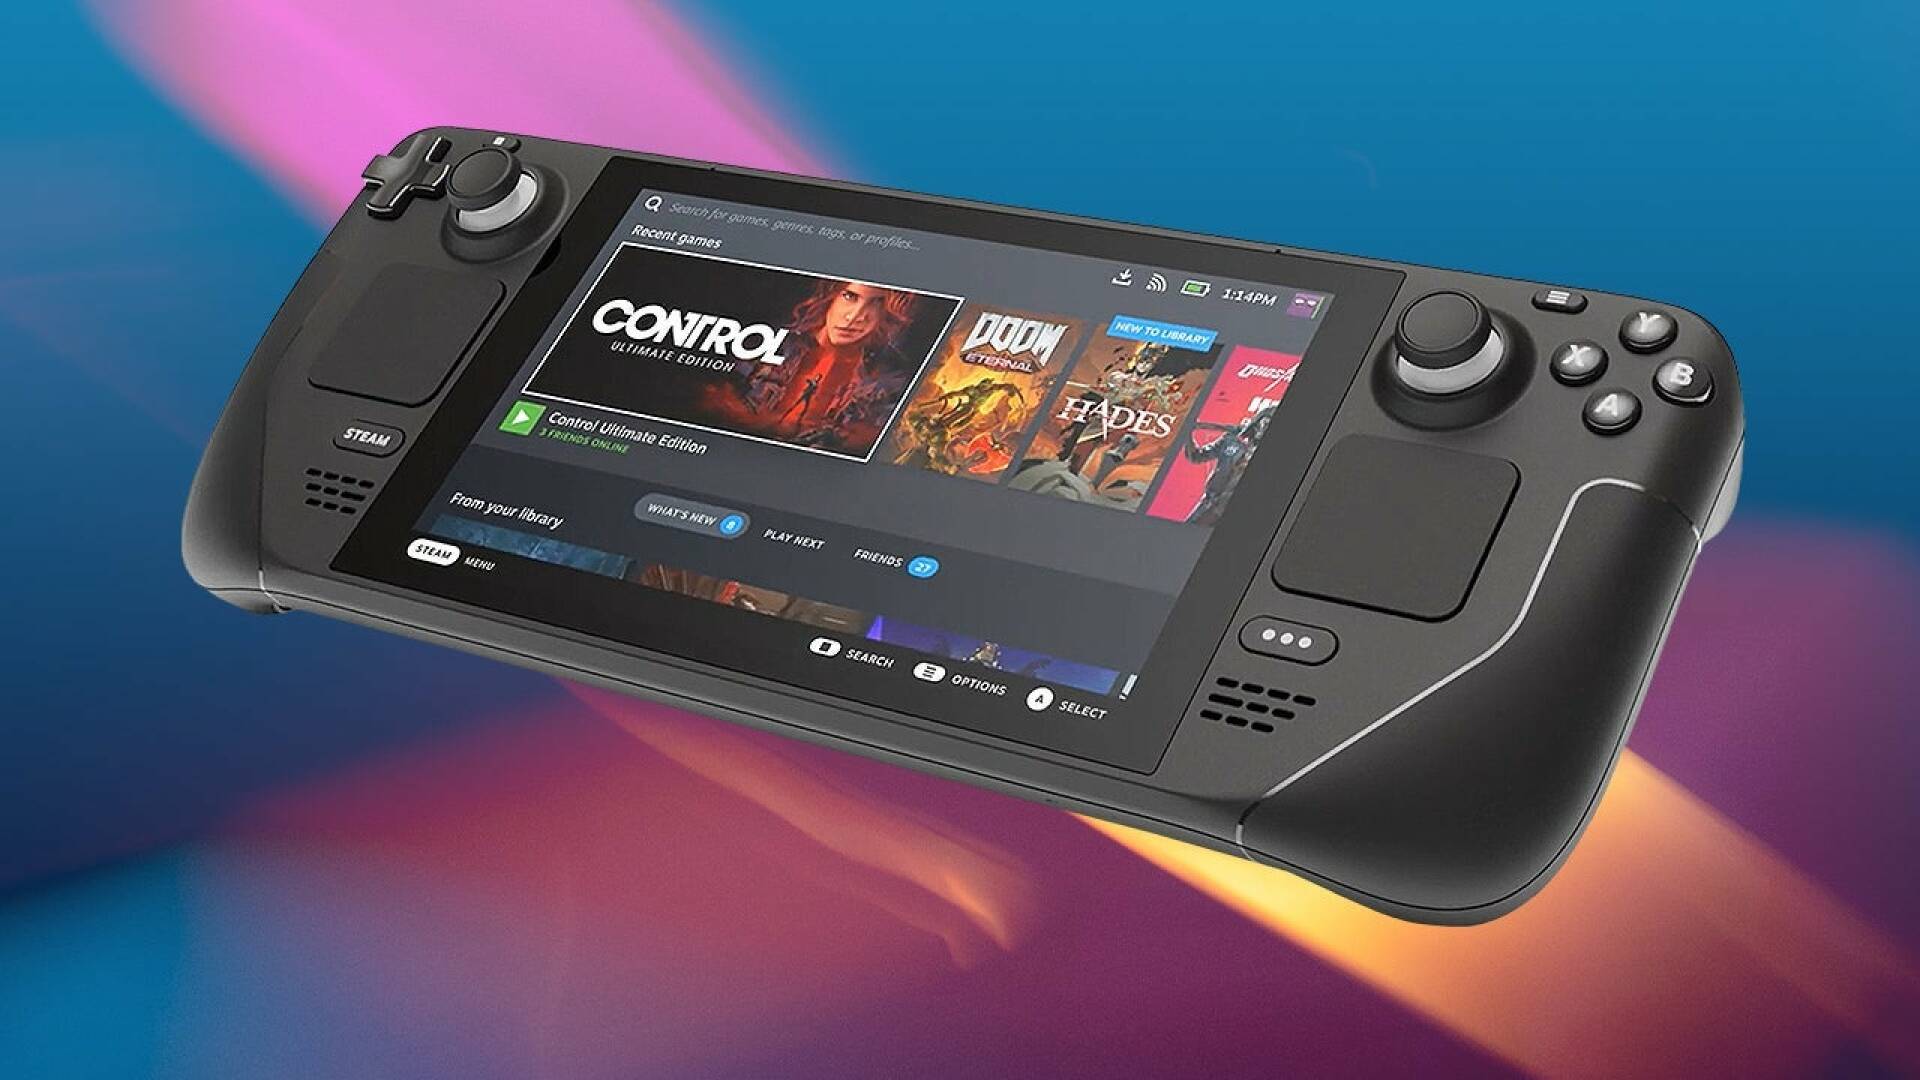 Steam Deck Like Nintendo Switch, the Valve console “copies” a feature